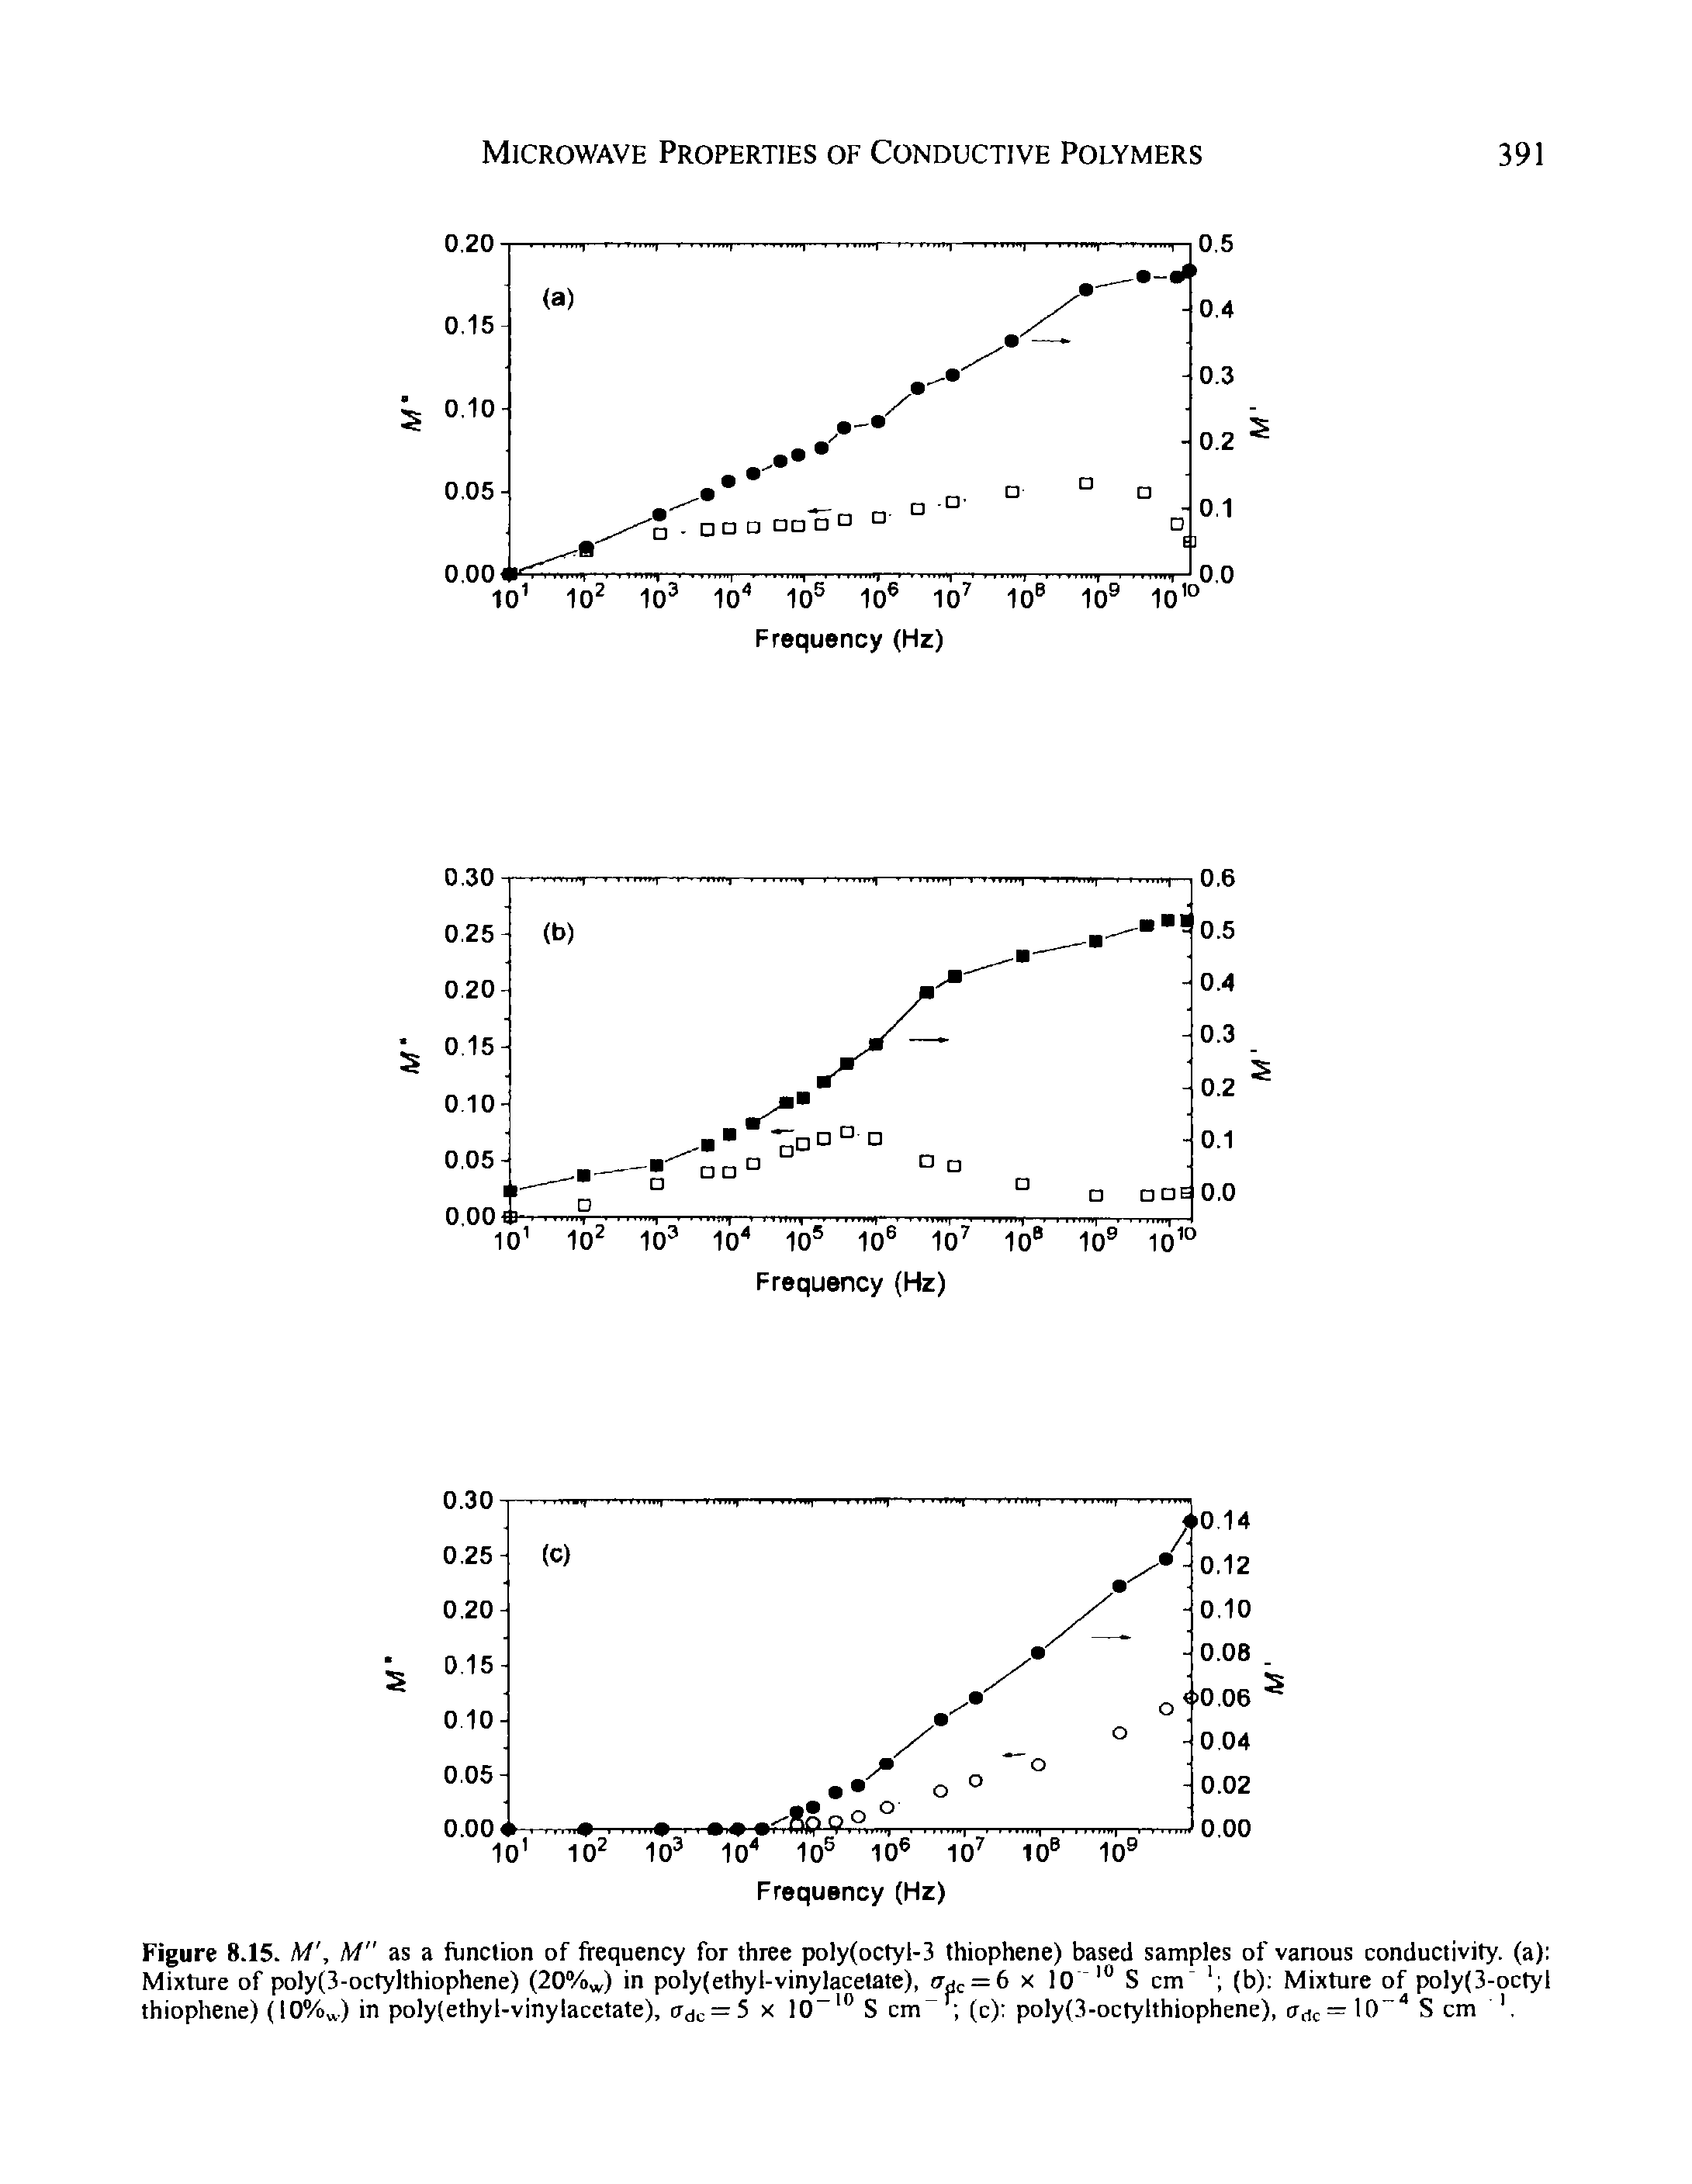 Figure 8.15. M, M" as a function of frequency for three poly(octyl-3 thiophene) based samples of vanous conductivity, (a) Mixture of poly(3-octylthiophene) (20% ) in poly(ethyl-vinylacetate), <7dc = 6 x 10 S cm (b) Mixture of poly(3-octyl thiophene) (10% ) in poly(ethyl-vinylacctate), erdc = 5 x 10 " S cm (c) poly(3-octylthiophene), = 10 S cm...